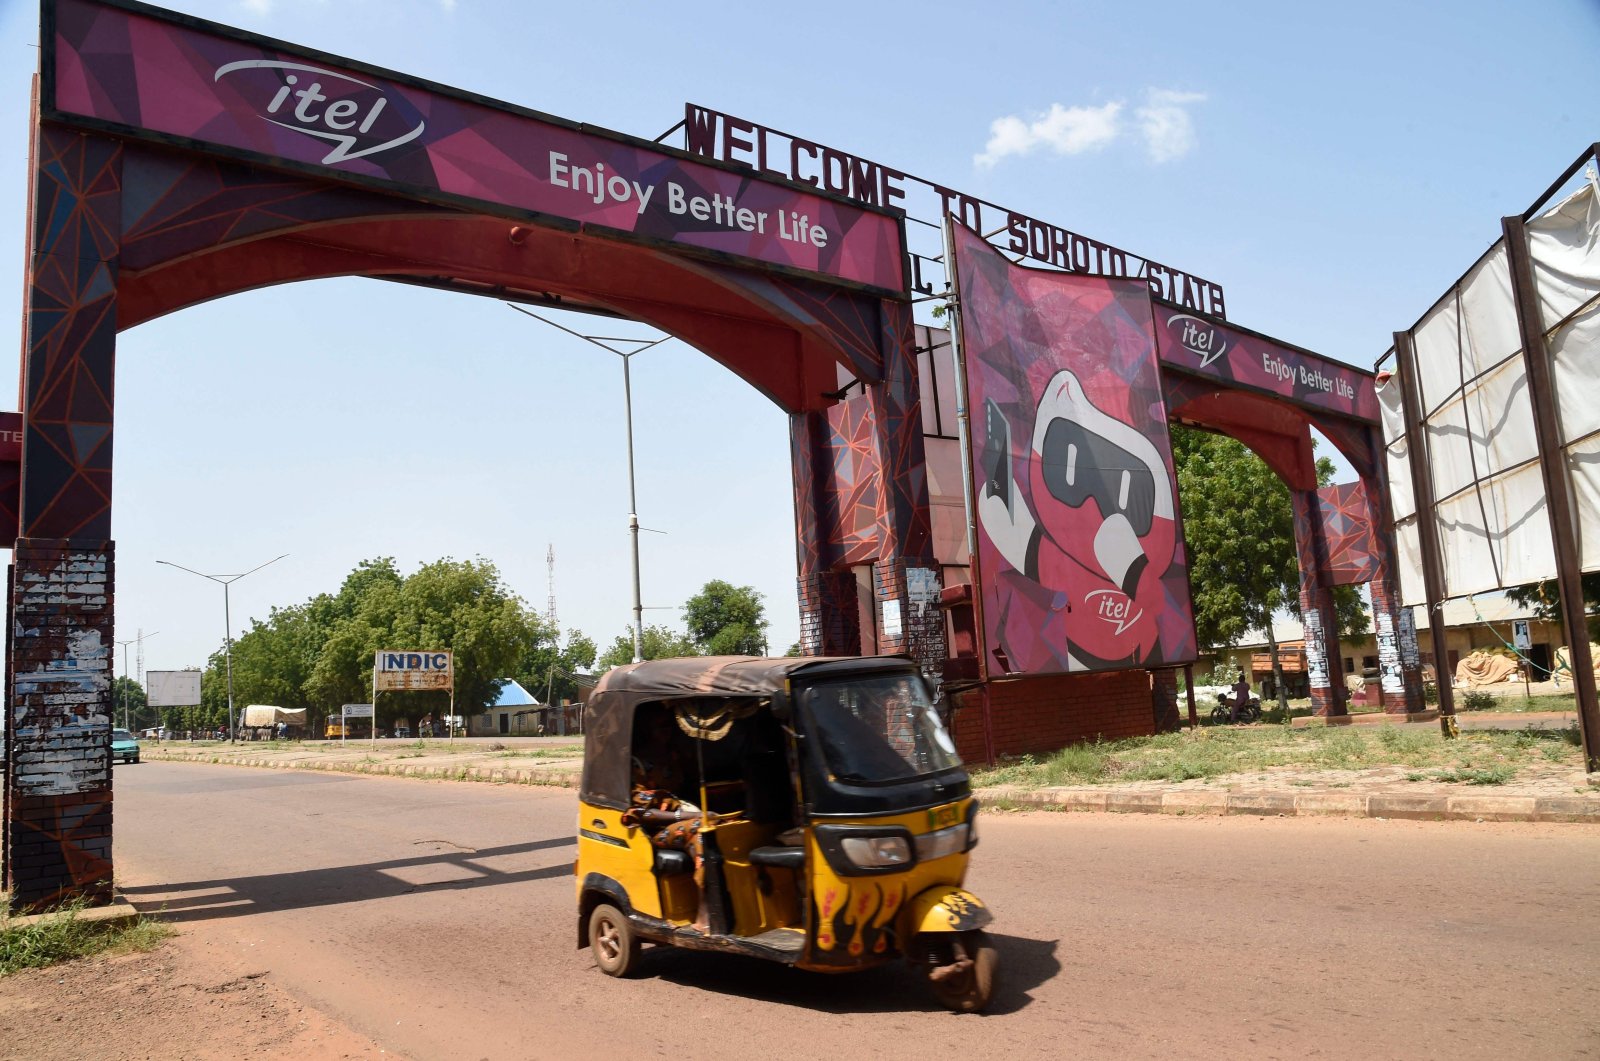 A rick-shaw drive past city gate in Sokoto, northwest Nigeria, Sept. 22, 2021. (AFP Photo)